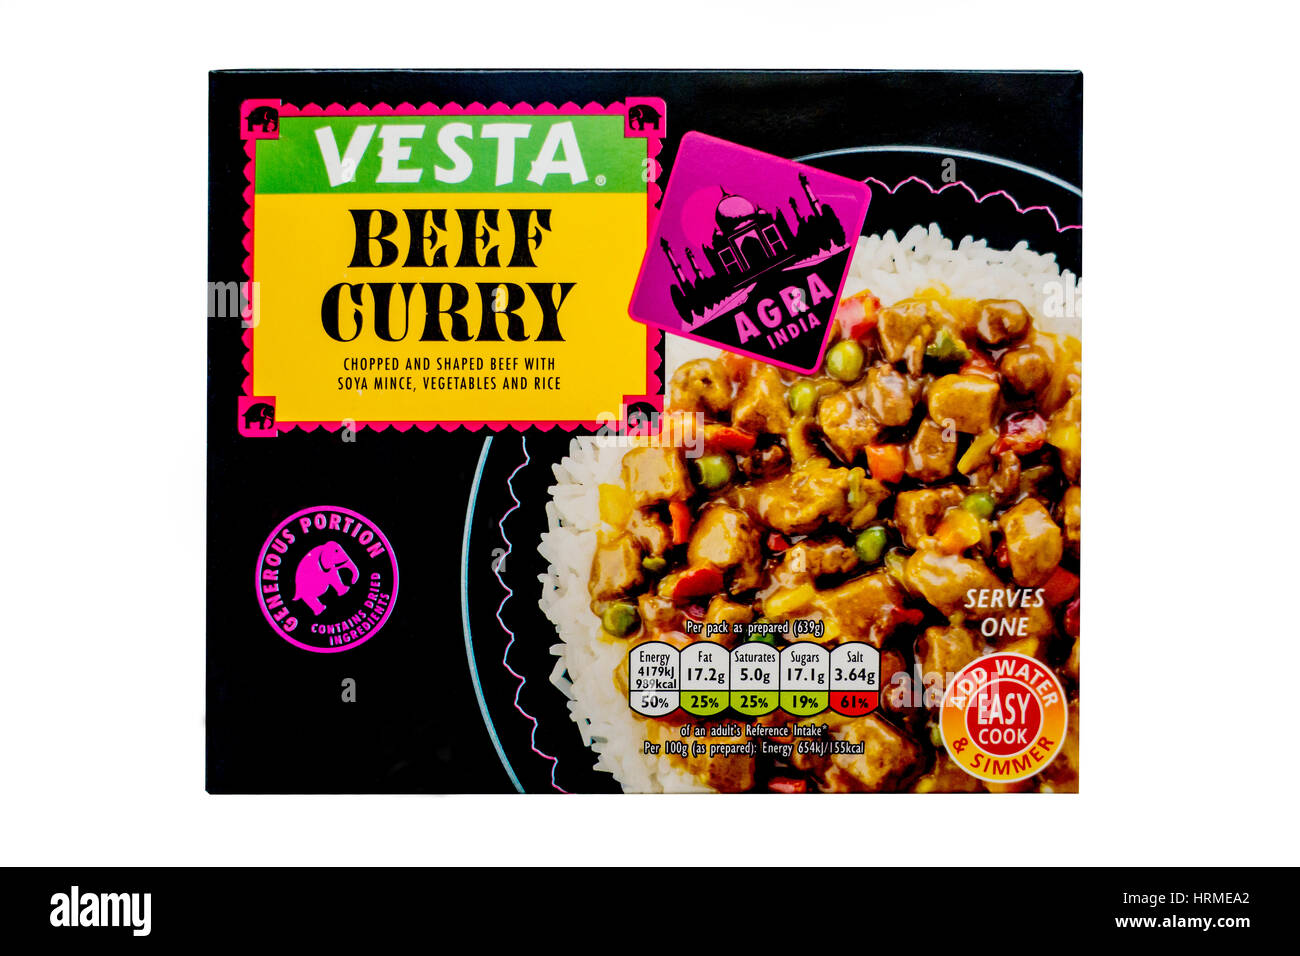 Vesta,Beef Curry,Chopped,Shaped,Beef,Soya Mince,Vegetables,Rice,Curry Sauce,Easy Cook, Stock Photo